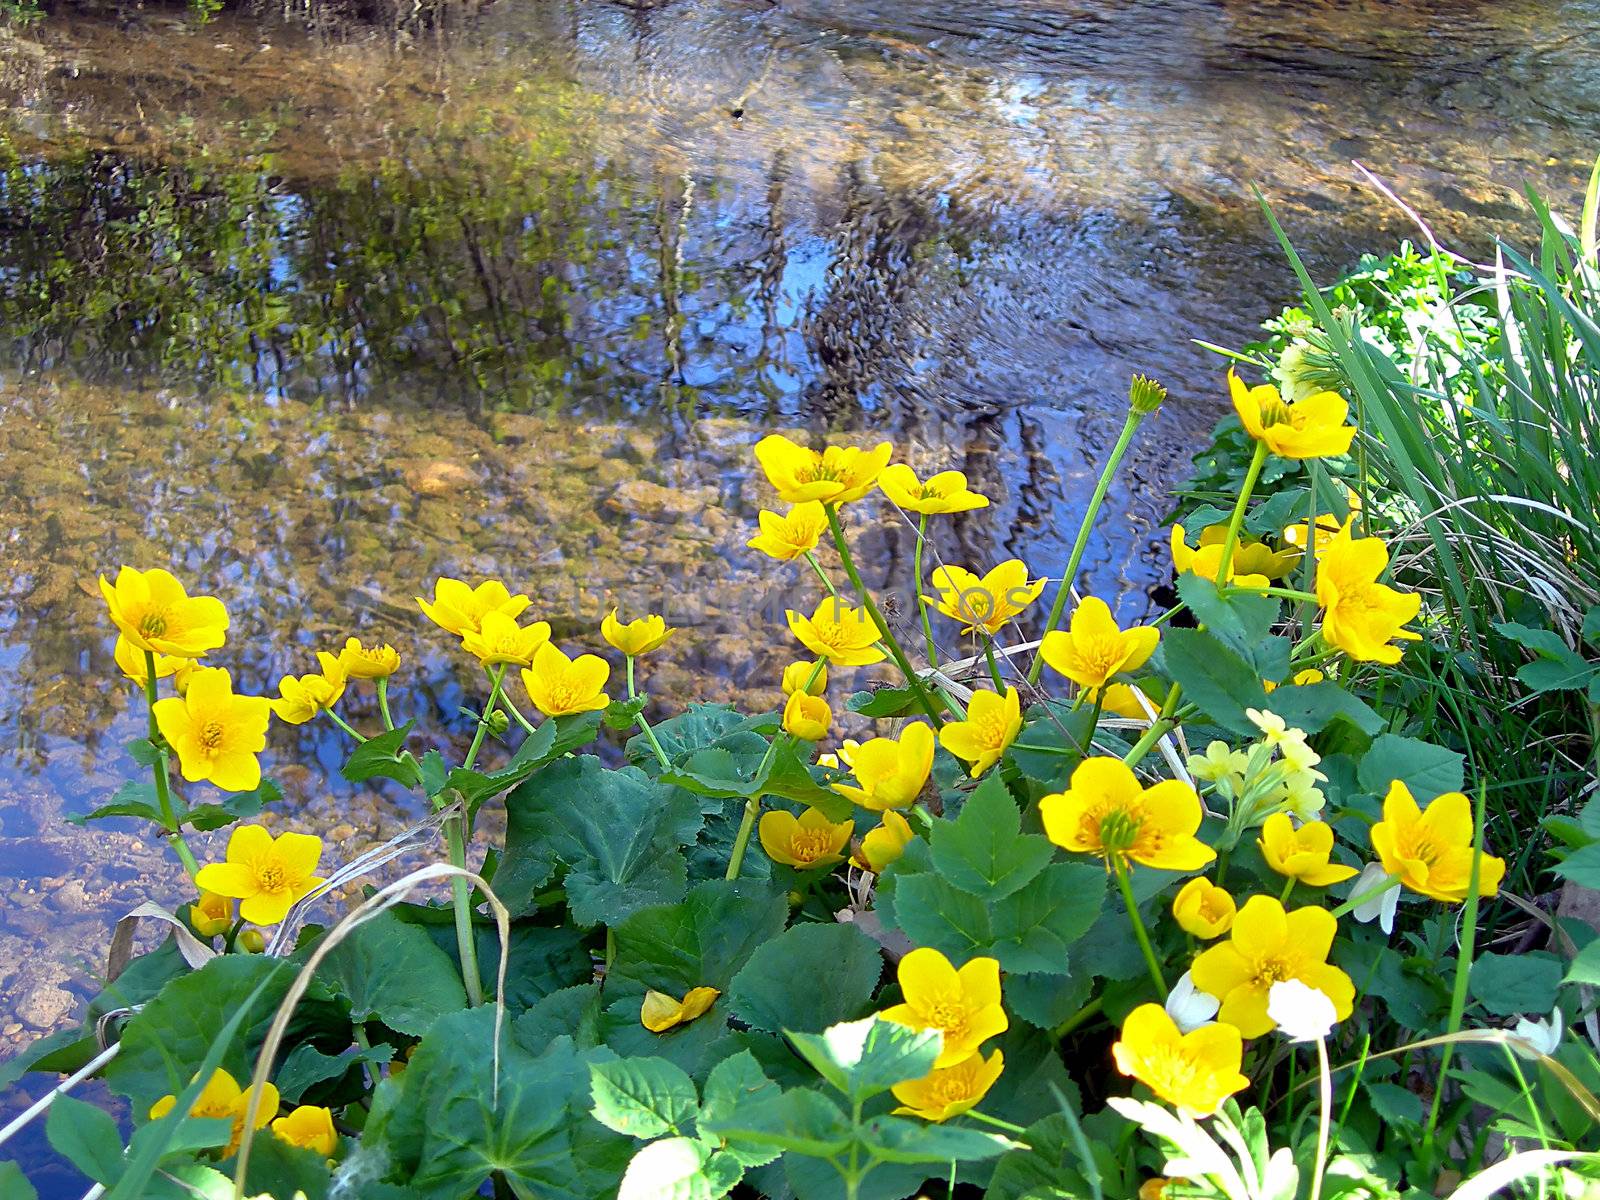           Nice peacefull natural landscape withe detail of buttercups and a brook